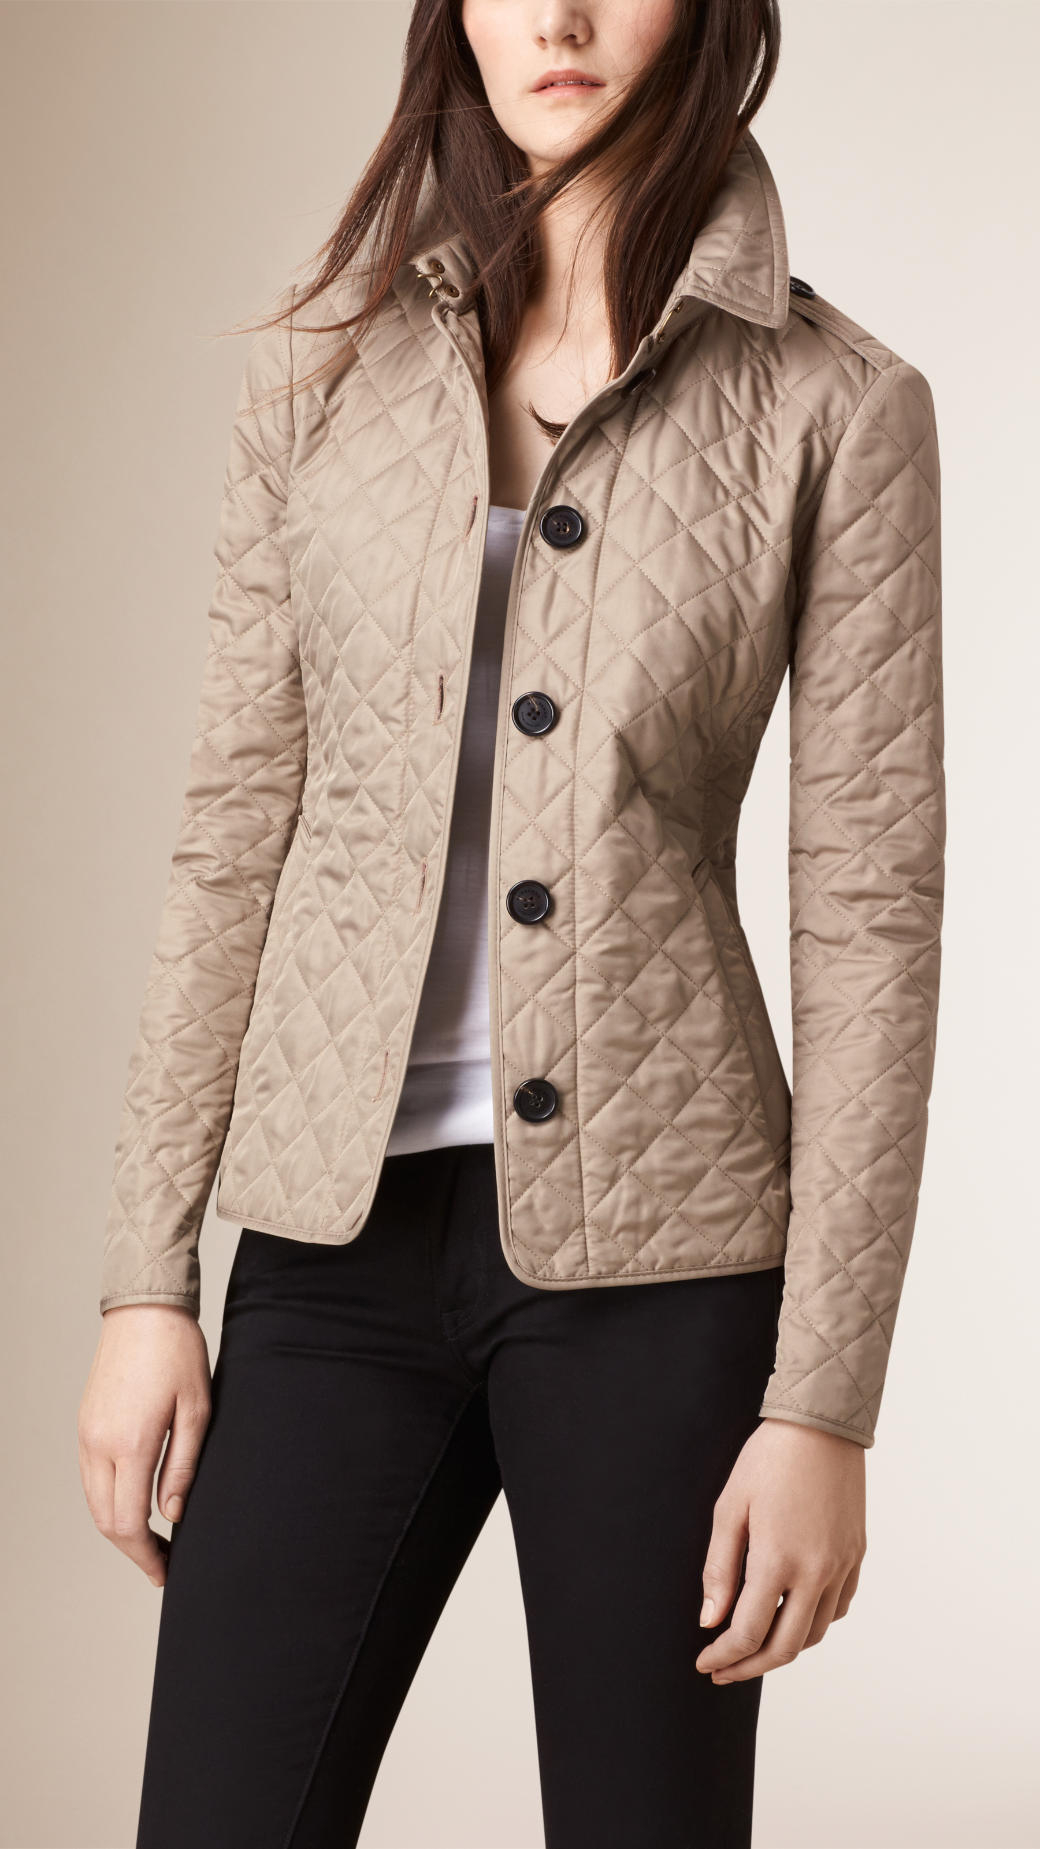 Burberry Diamond Quilted Jacket in Mushroom (Natural) - Lyst